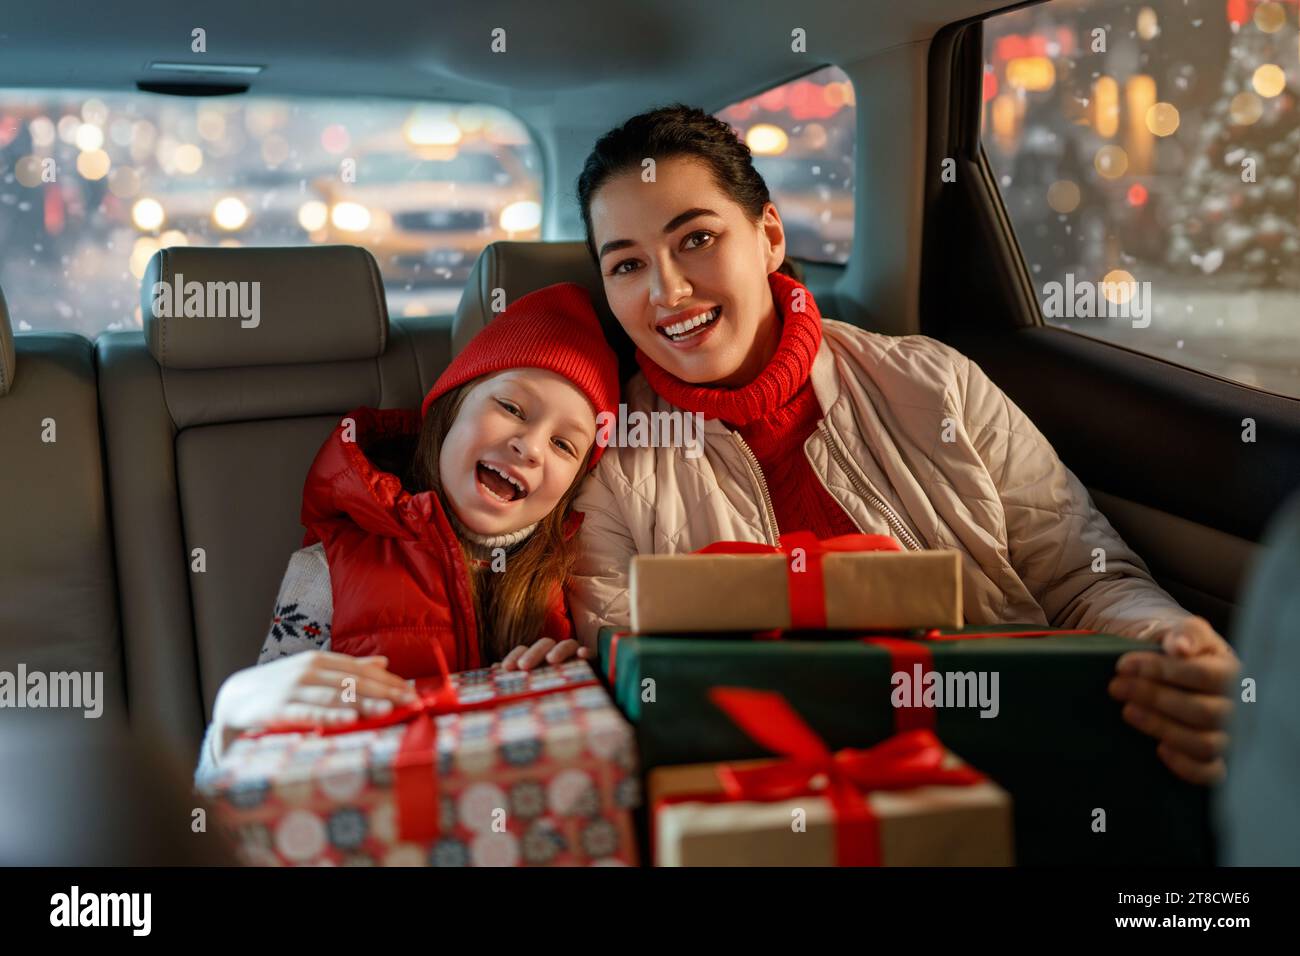 Woman and her child  holding presents and delivering them on car to home. Holidays concept. Time of Christmas Eve. Stock Photo